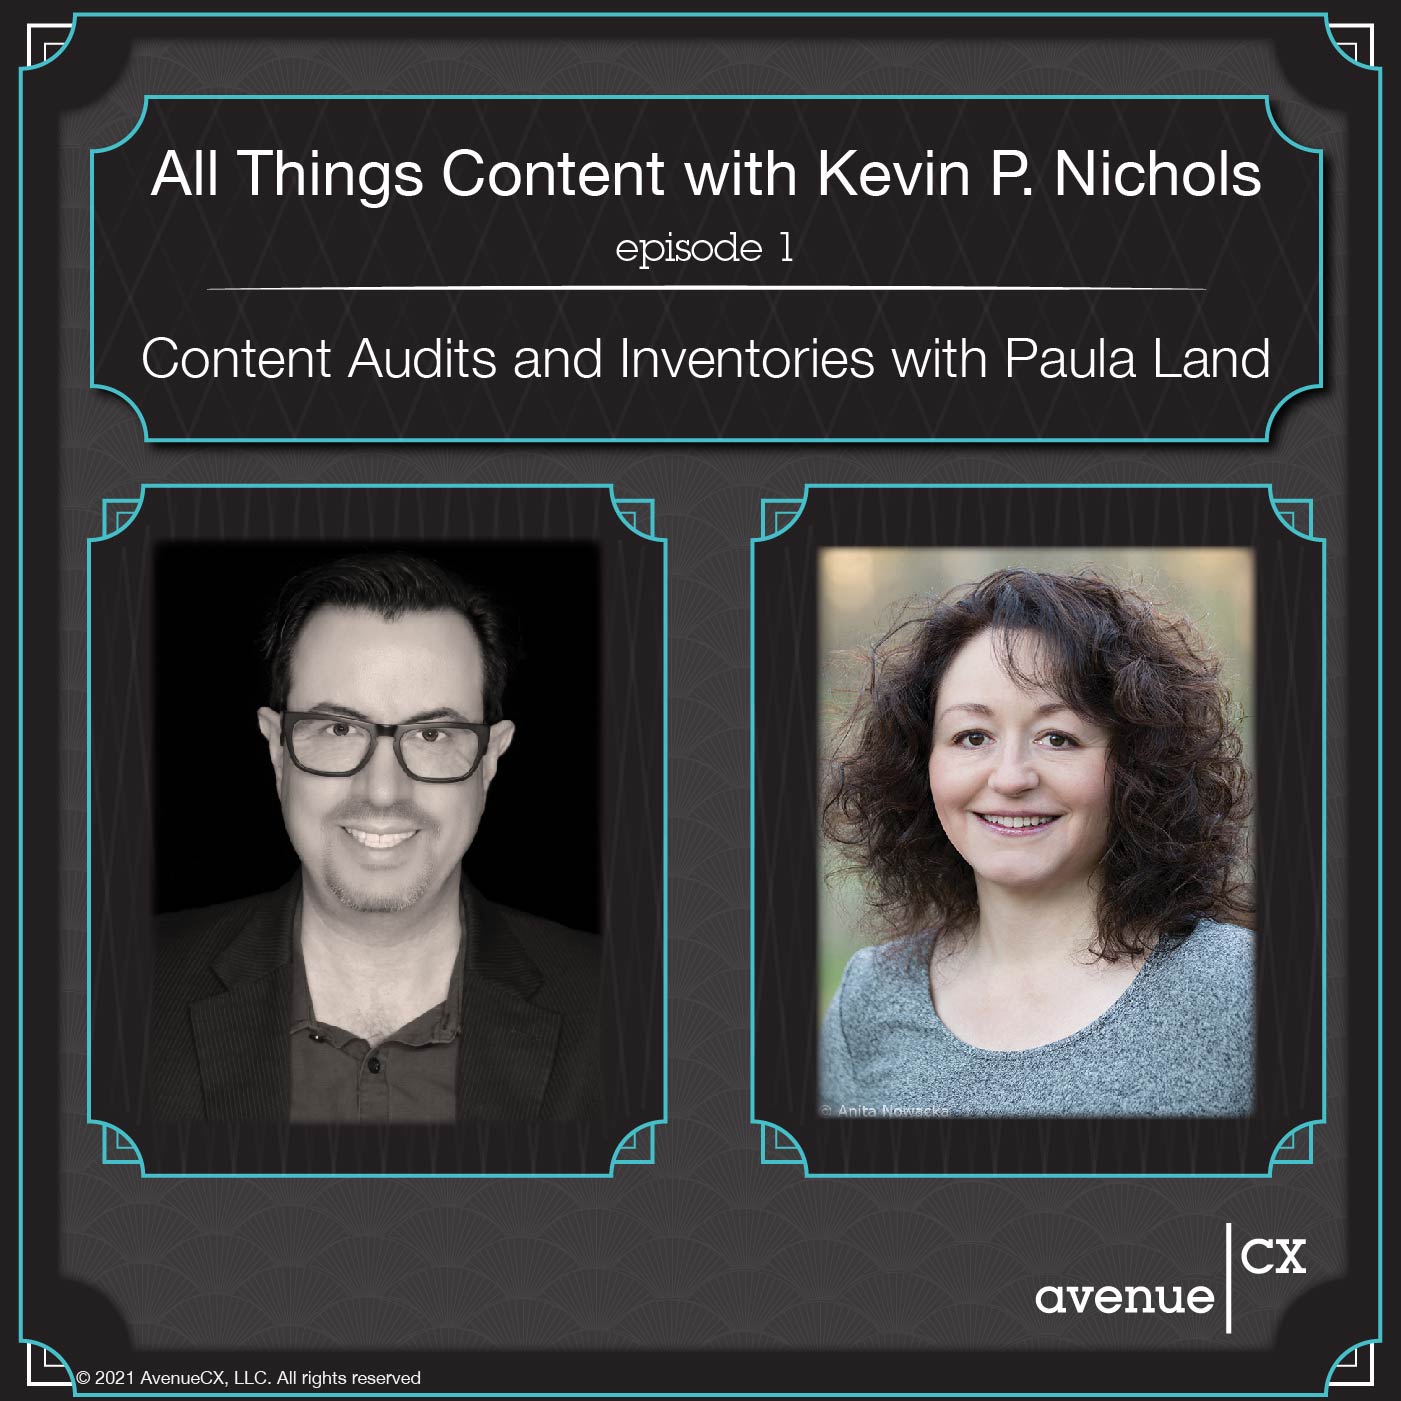 Paula Land Content Inventories and Audits All Things Content Podcast with Kevin P Nichols